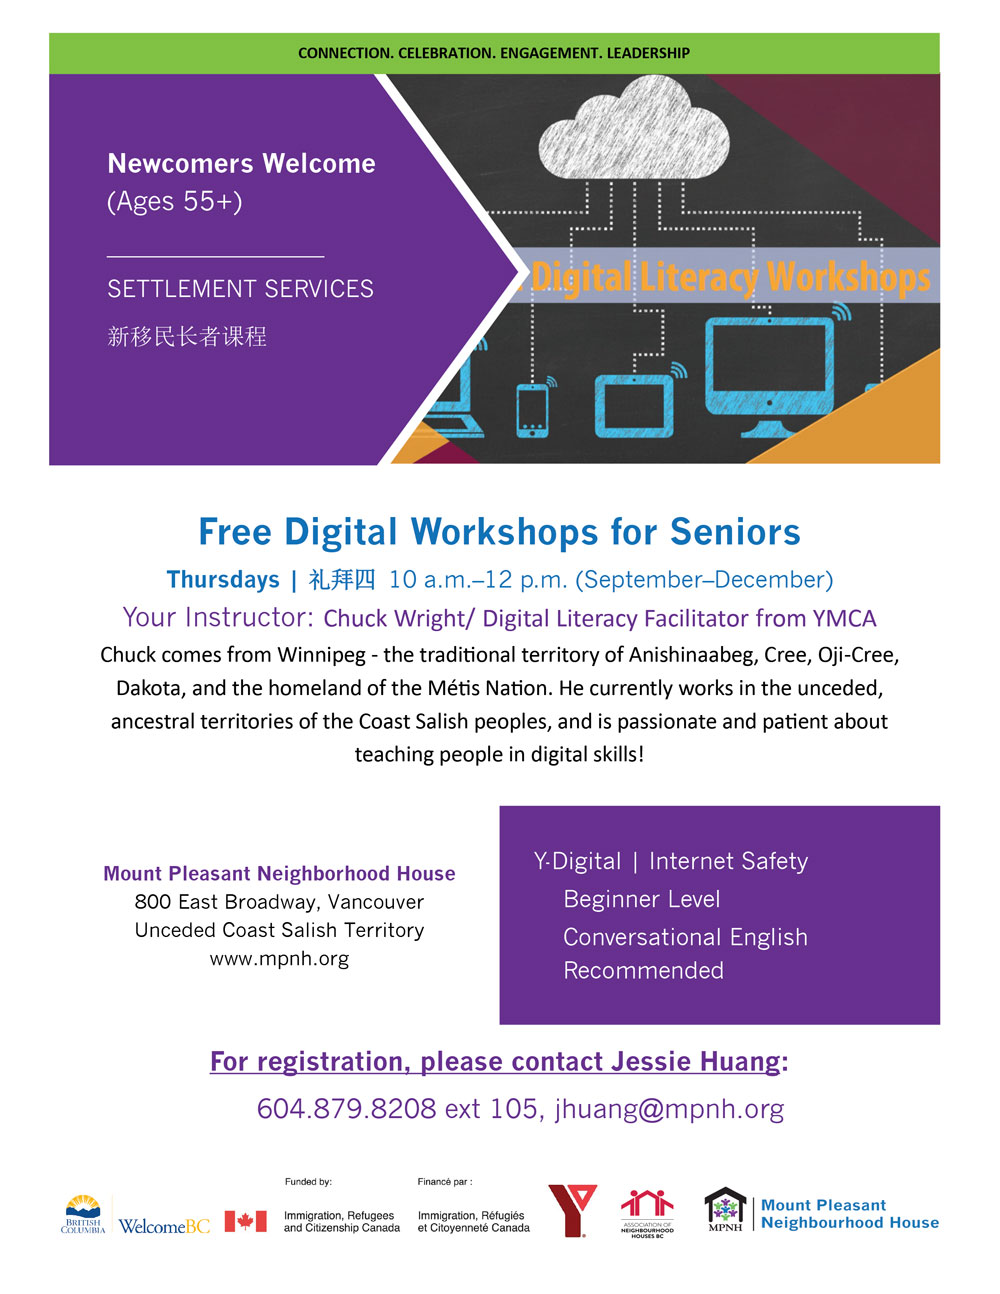 An image of the program poster, featuring a graphic of computers and handheld digital devices, along with a digial cloud